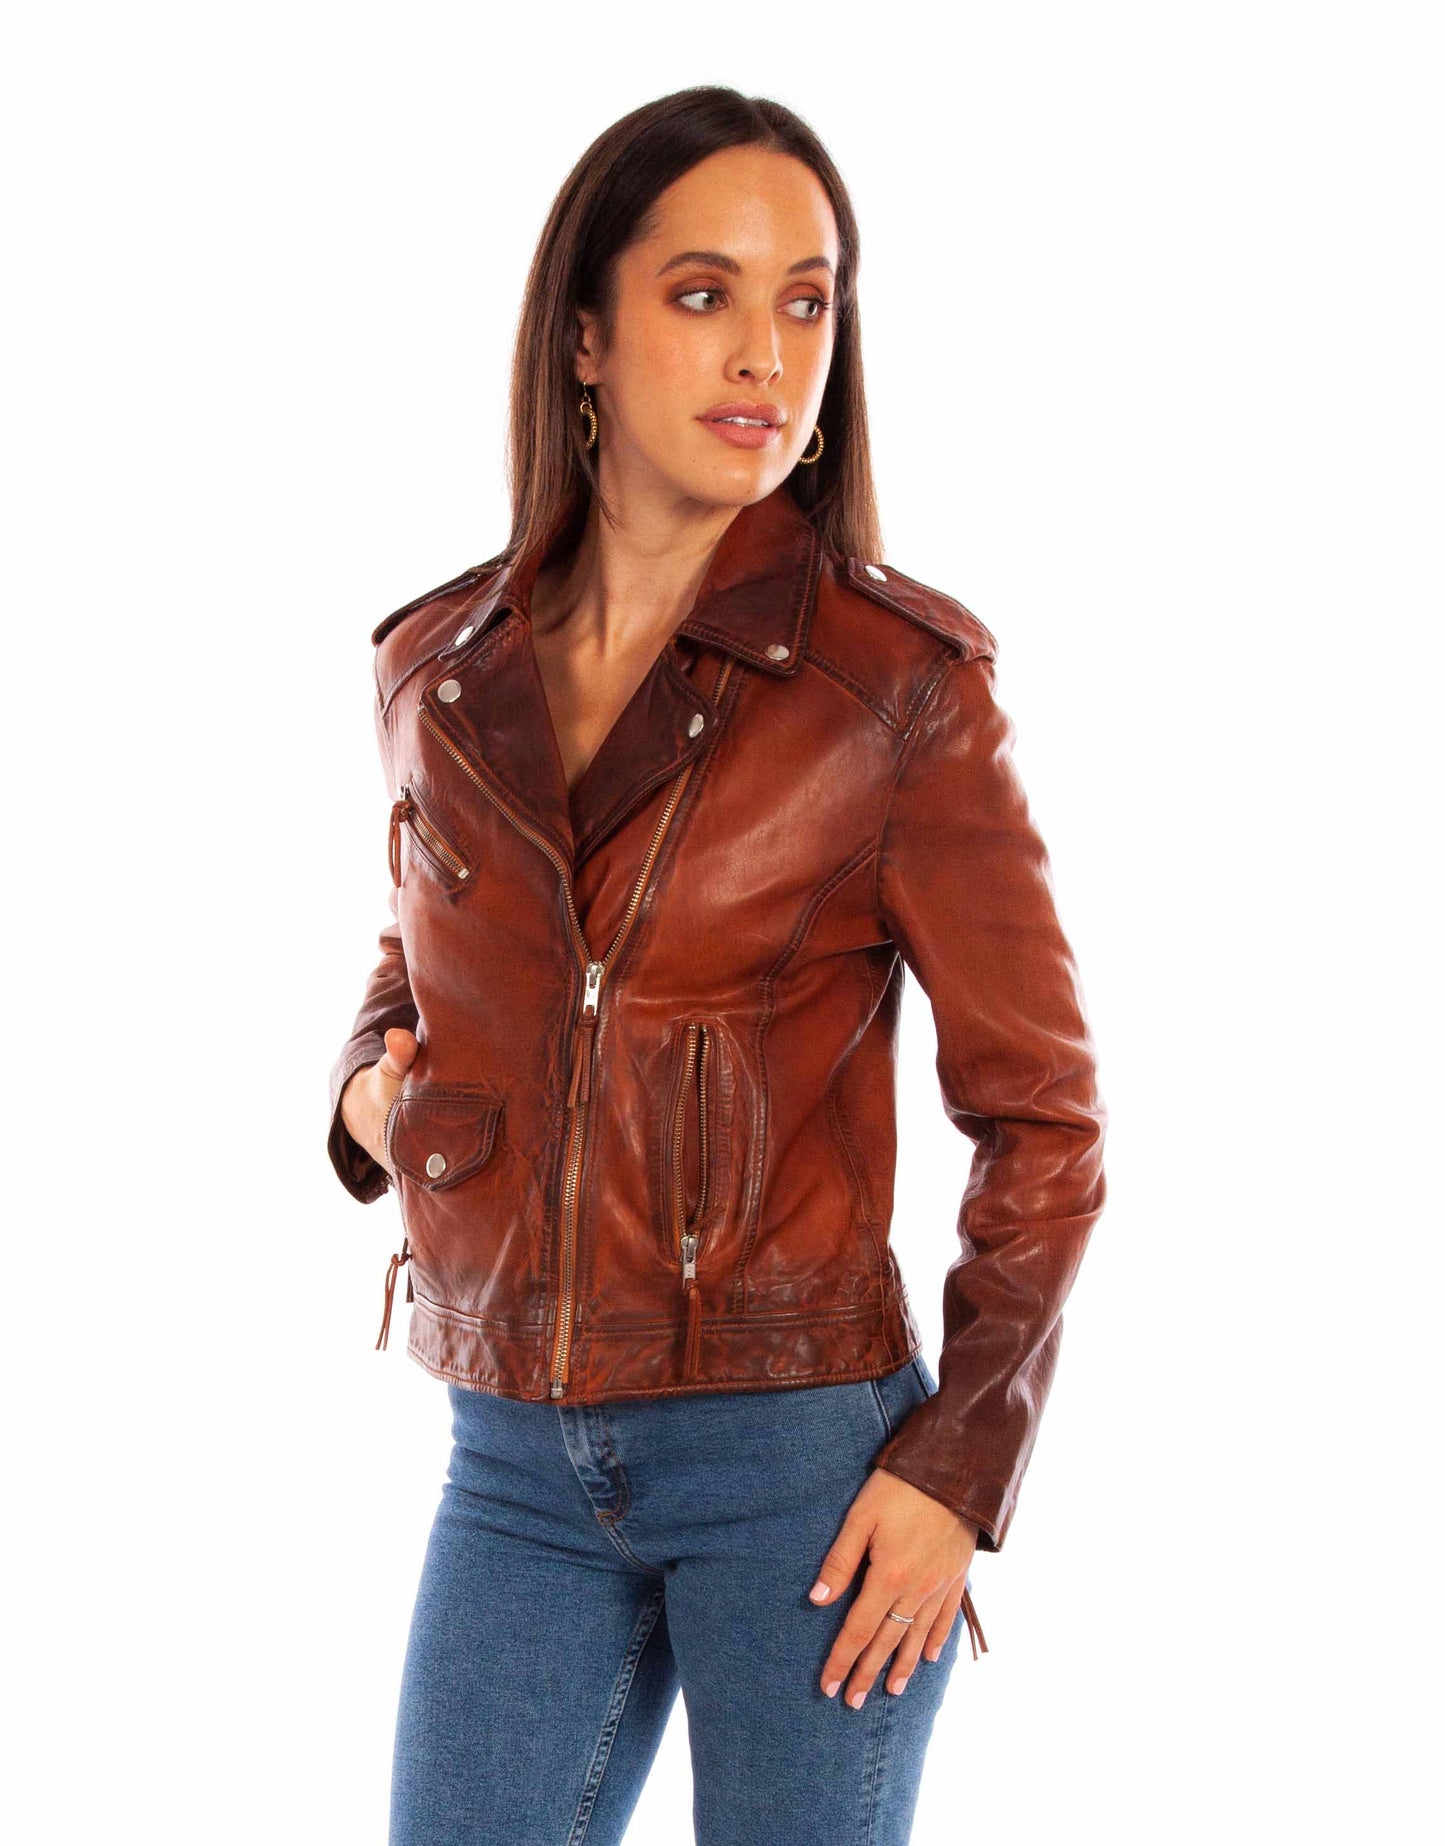 Vintage Brown Leather Motorcycle Jacket at Bourbon Cowgirl